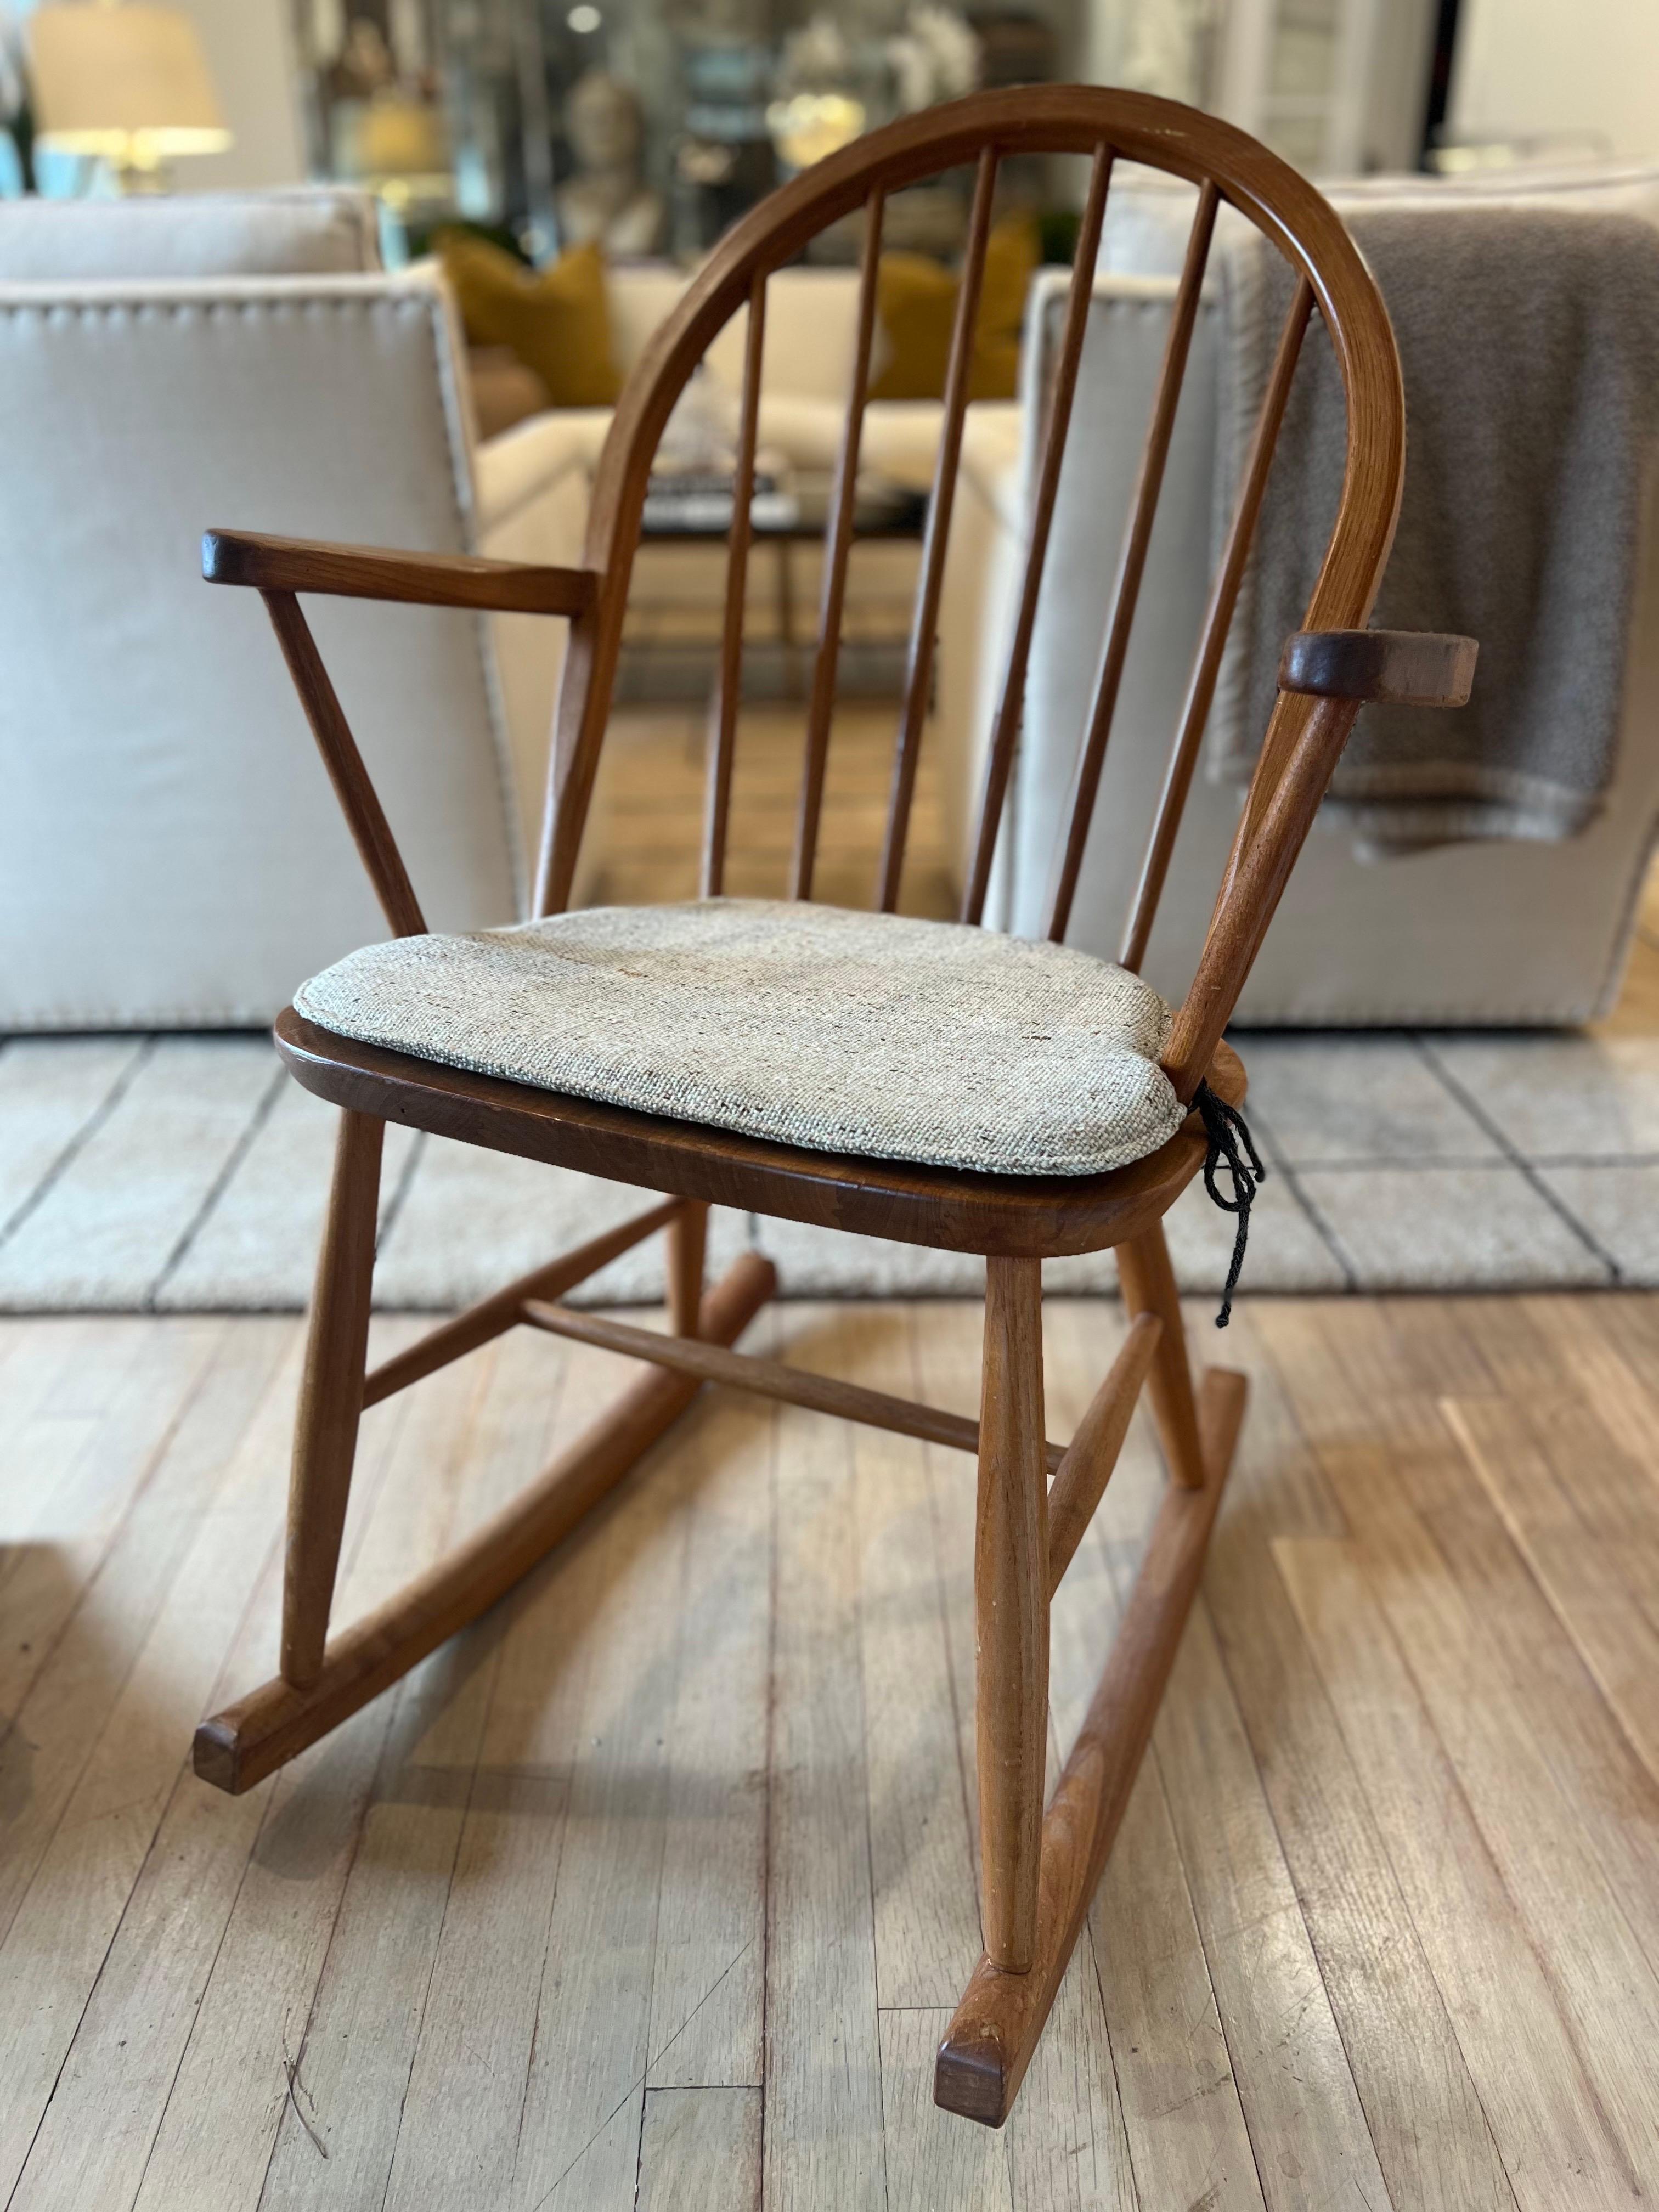 Vintage Jorgensen Danish Rocking Chair. Smaller scale perfect for a tight corner or childs bedroom.

Solid structure. Comes with seat cushion as seen in pics.